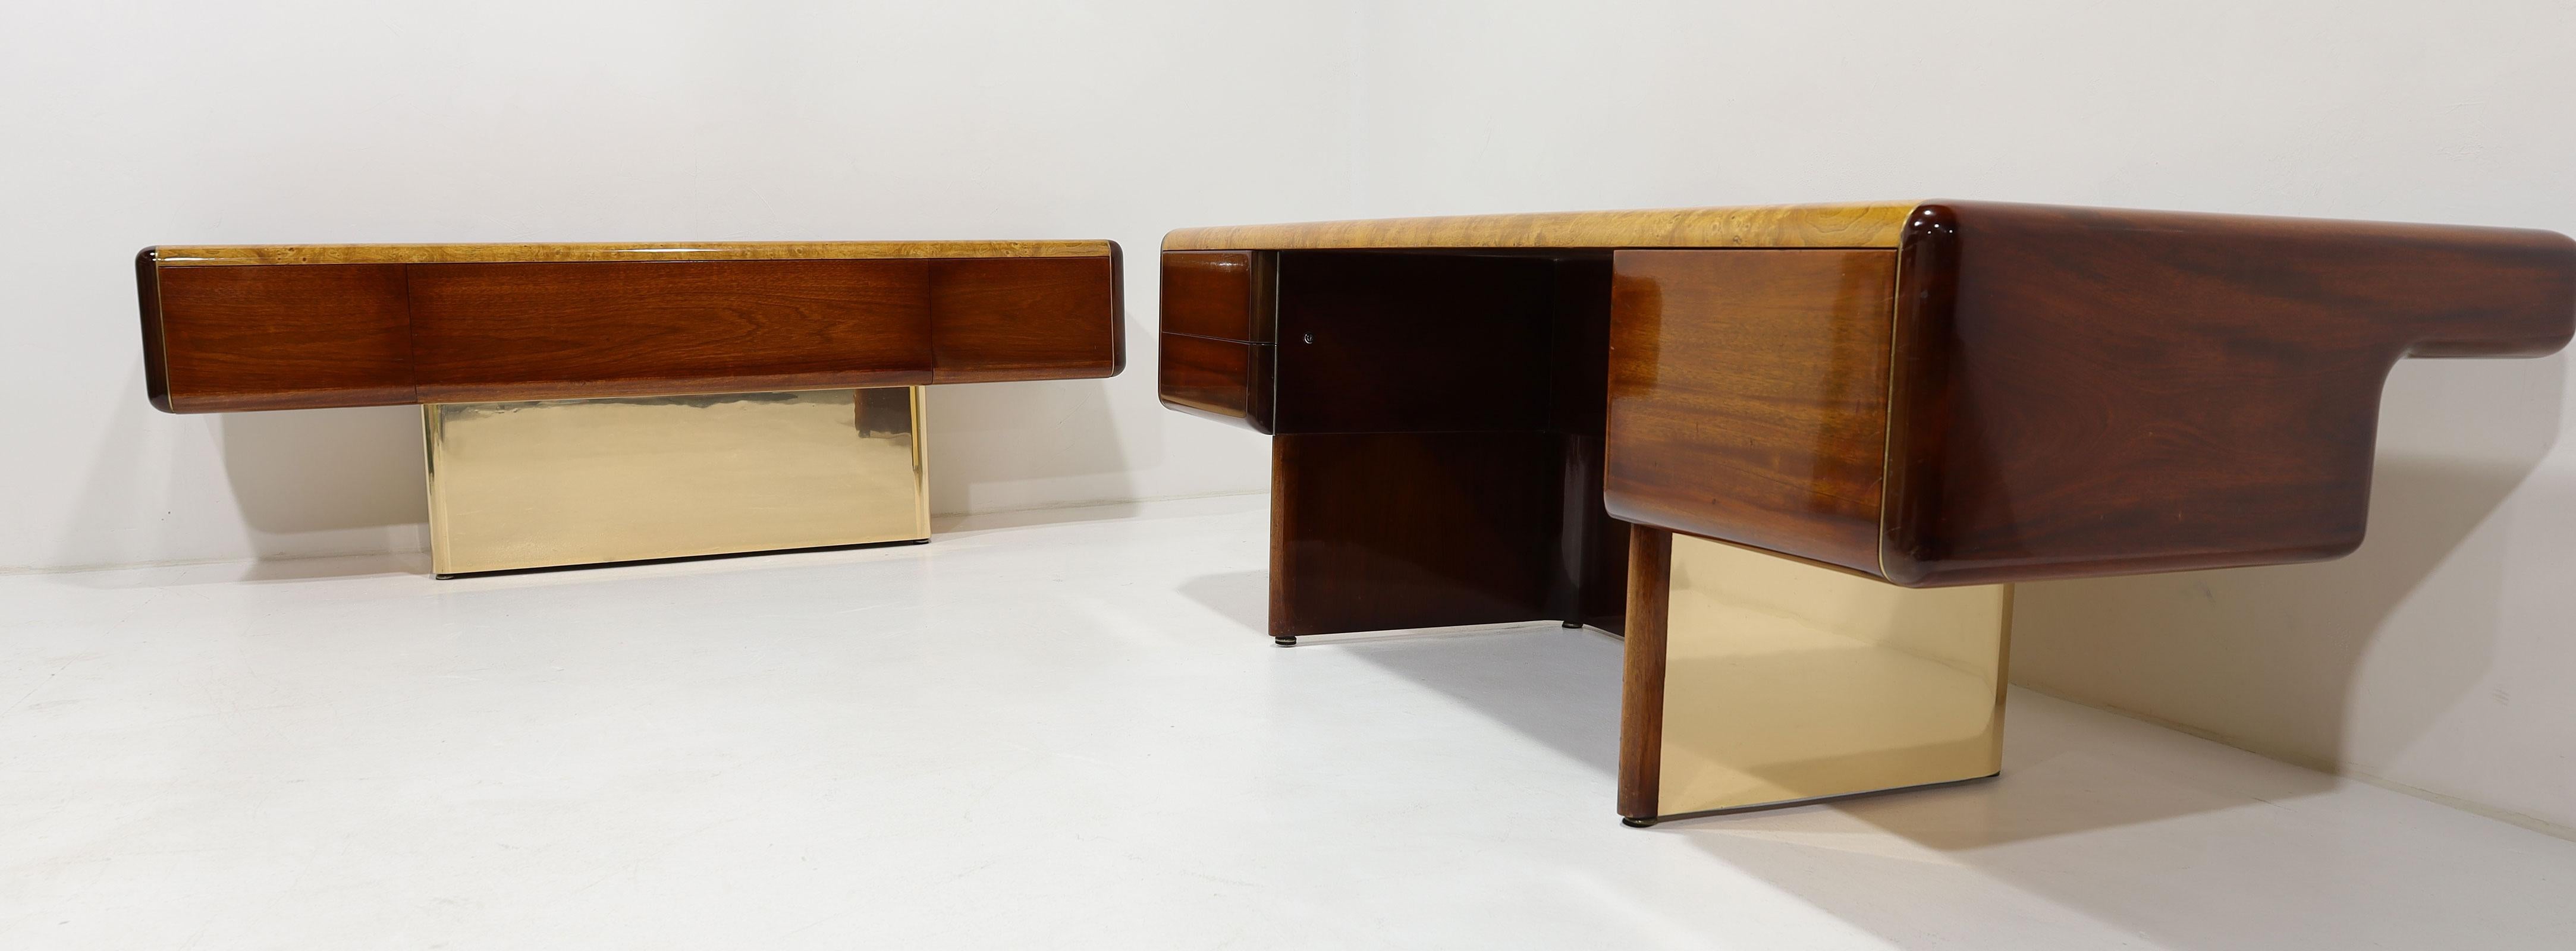 Vladimir Kagan Design Desk and Credenza in Burl and Mahogany with Brass Base In Good Condition For Sale In Dallas, TX